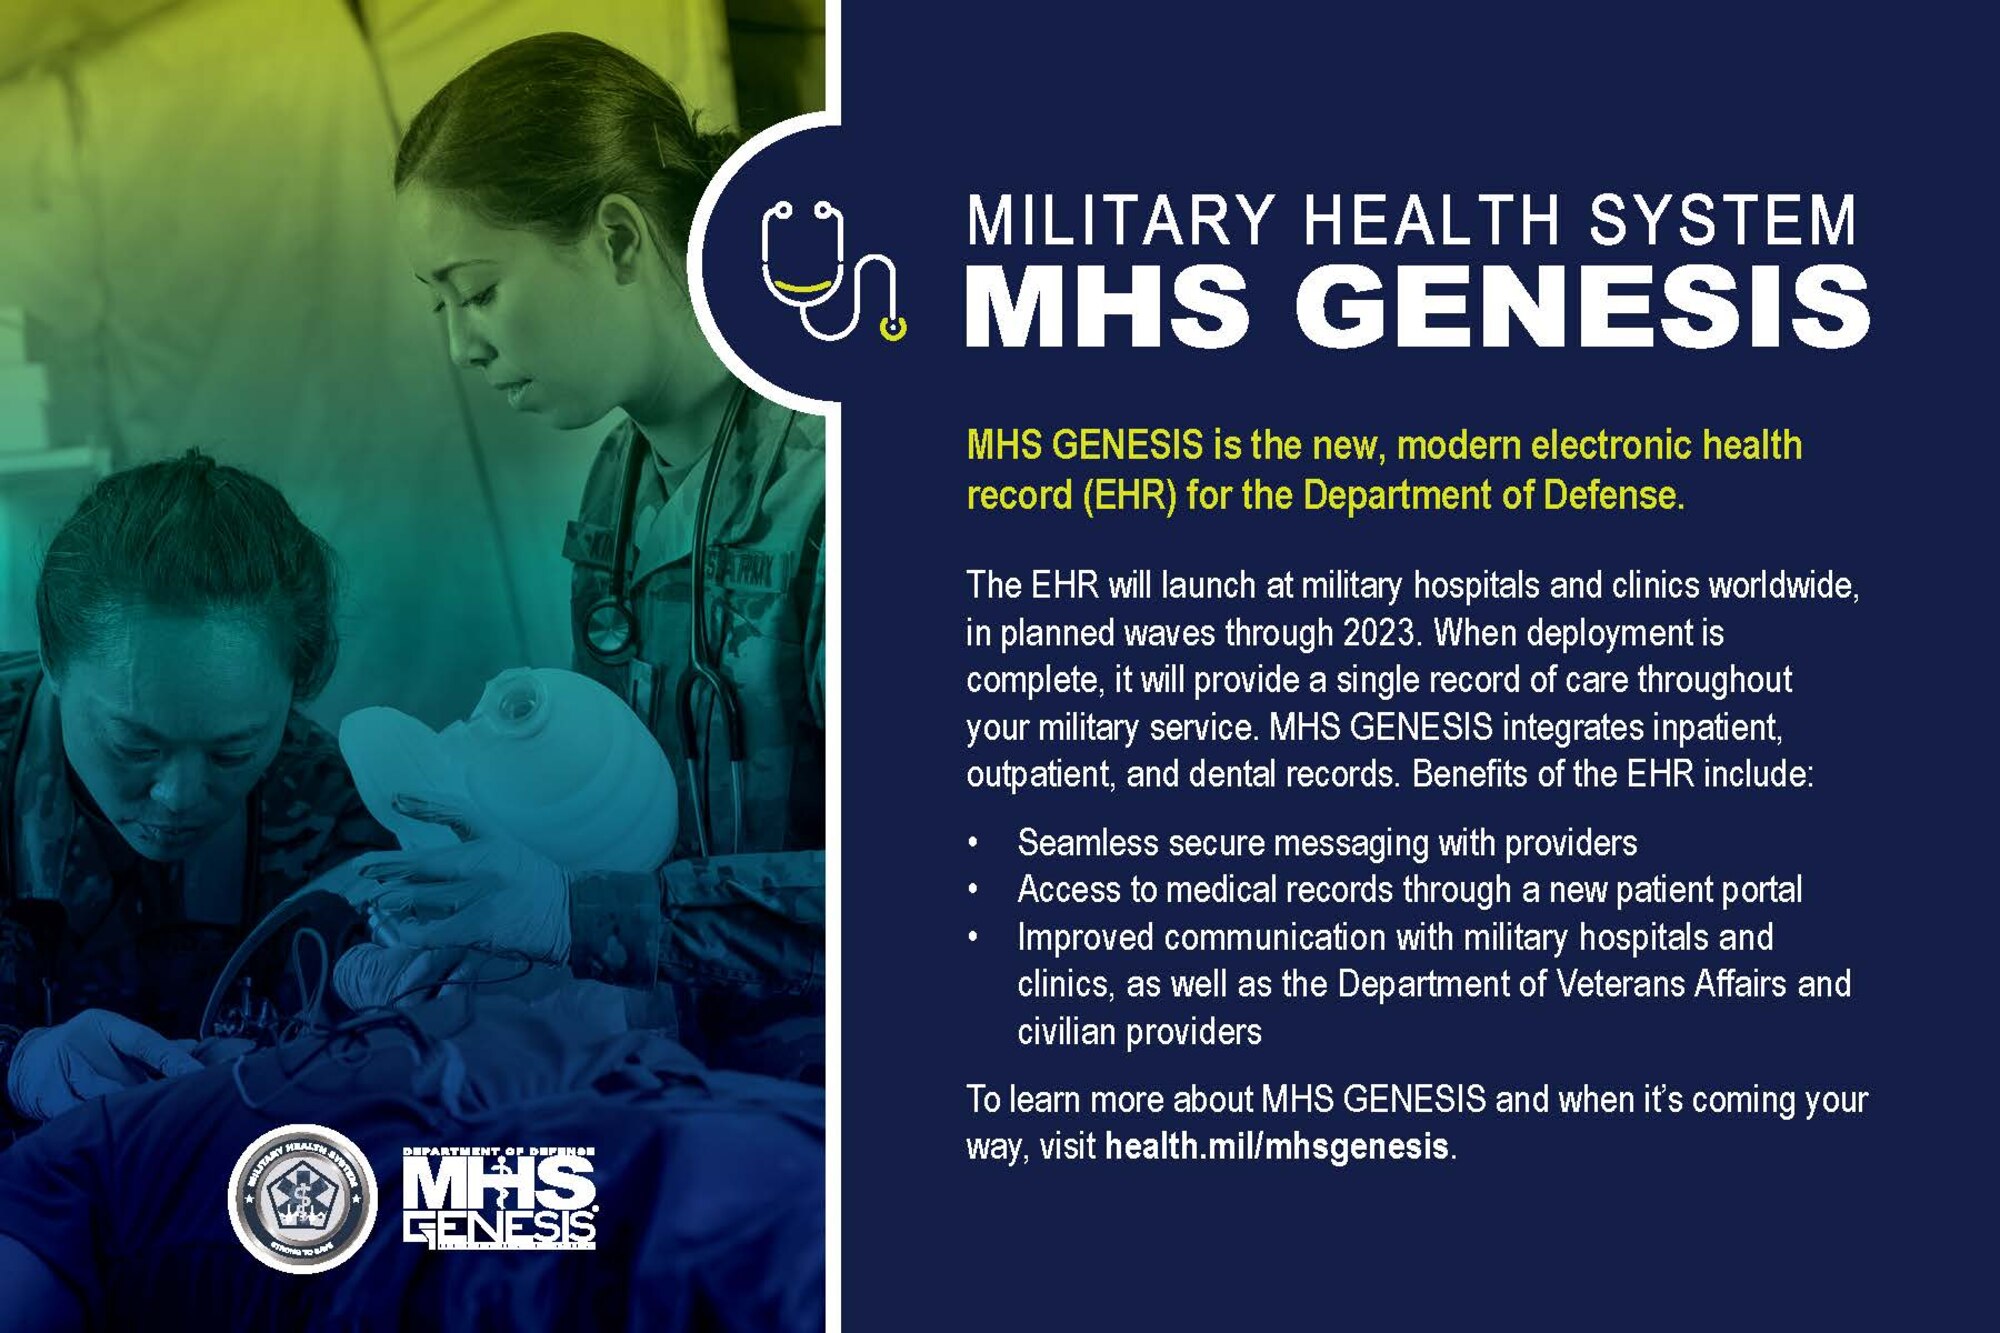 The 90th Medical Group transitions to a new electronic health record call MHS GENESIS at F.E. Warren Air Force Base, Wyoming, April 24, 2021. Appointment availability from April to June 2021 will be reduced. In preparation for the transition please register for the new patient portal at www.patientportal.mhsgenesis.health.mil. (Department of Defense graphic)